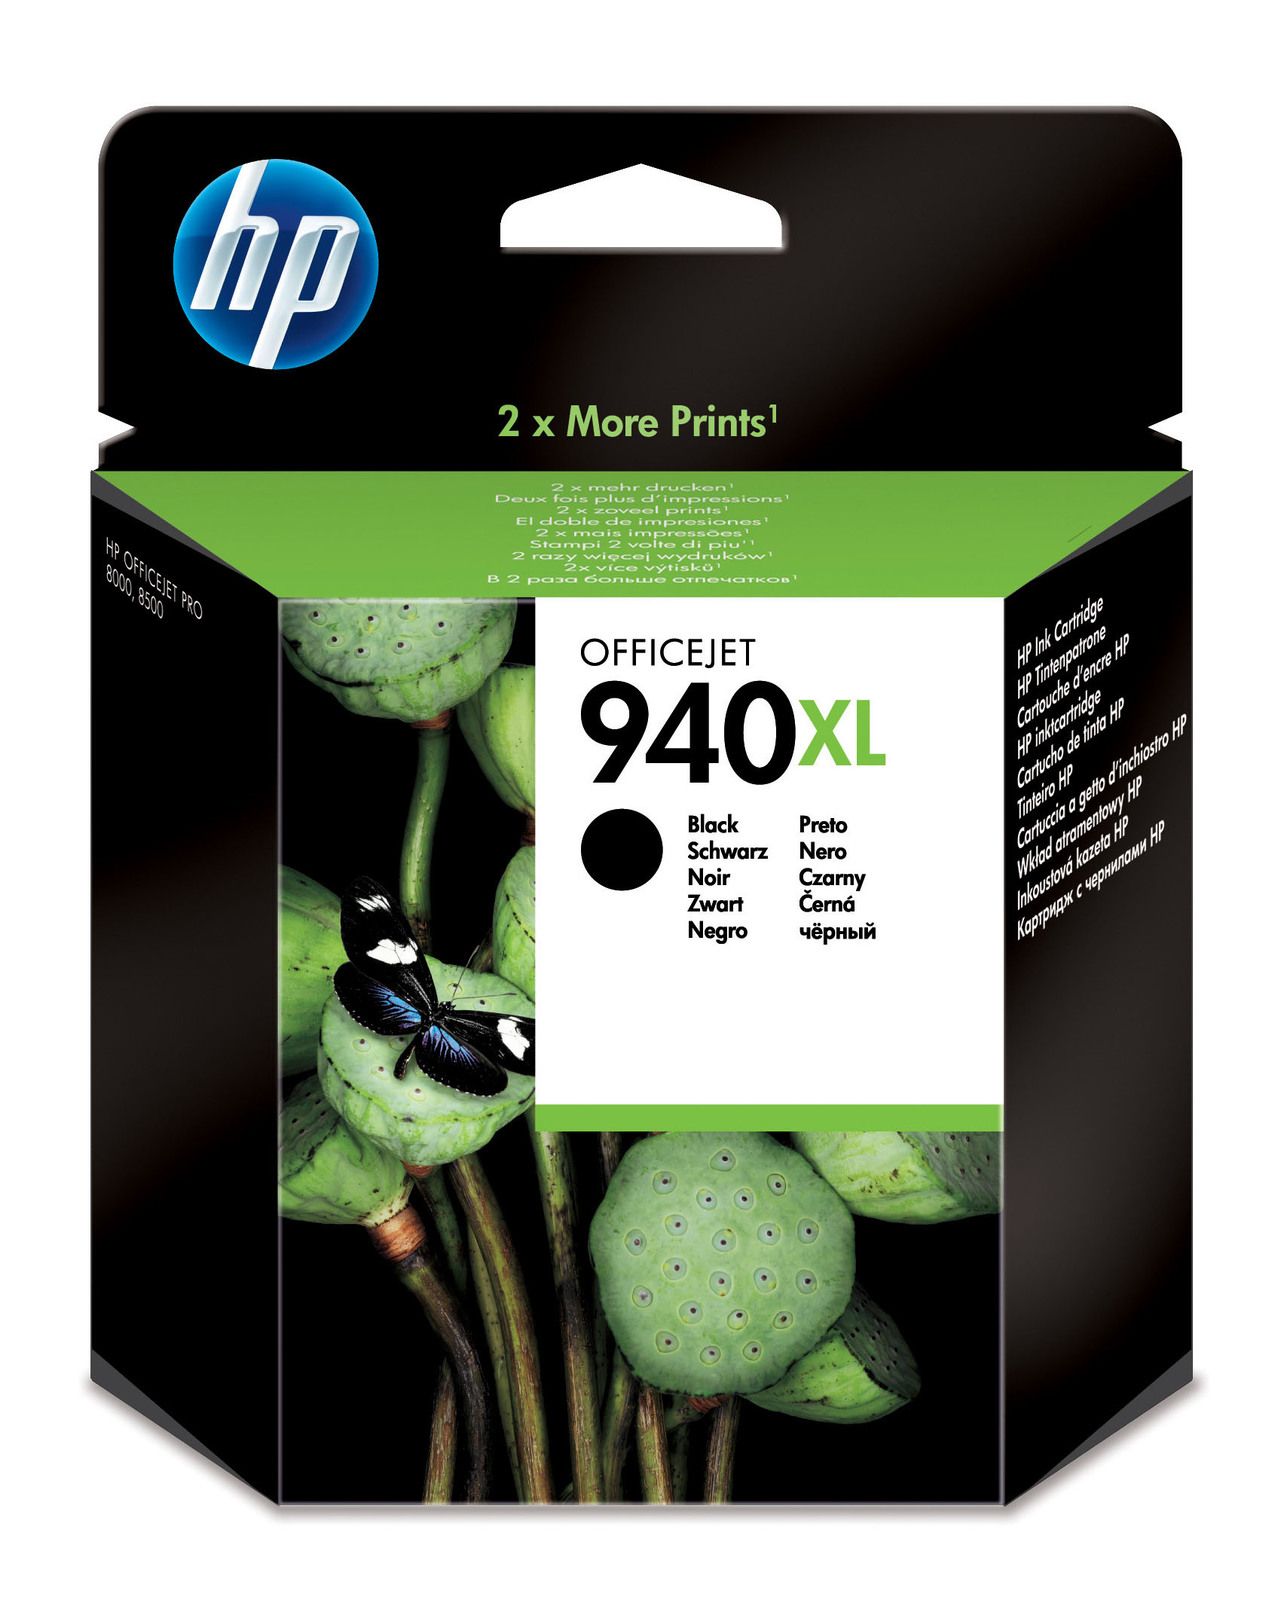 Related to HP 8000 Ink: C4906AE